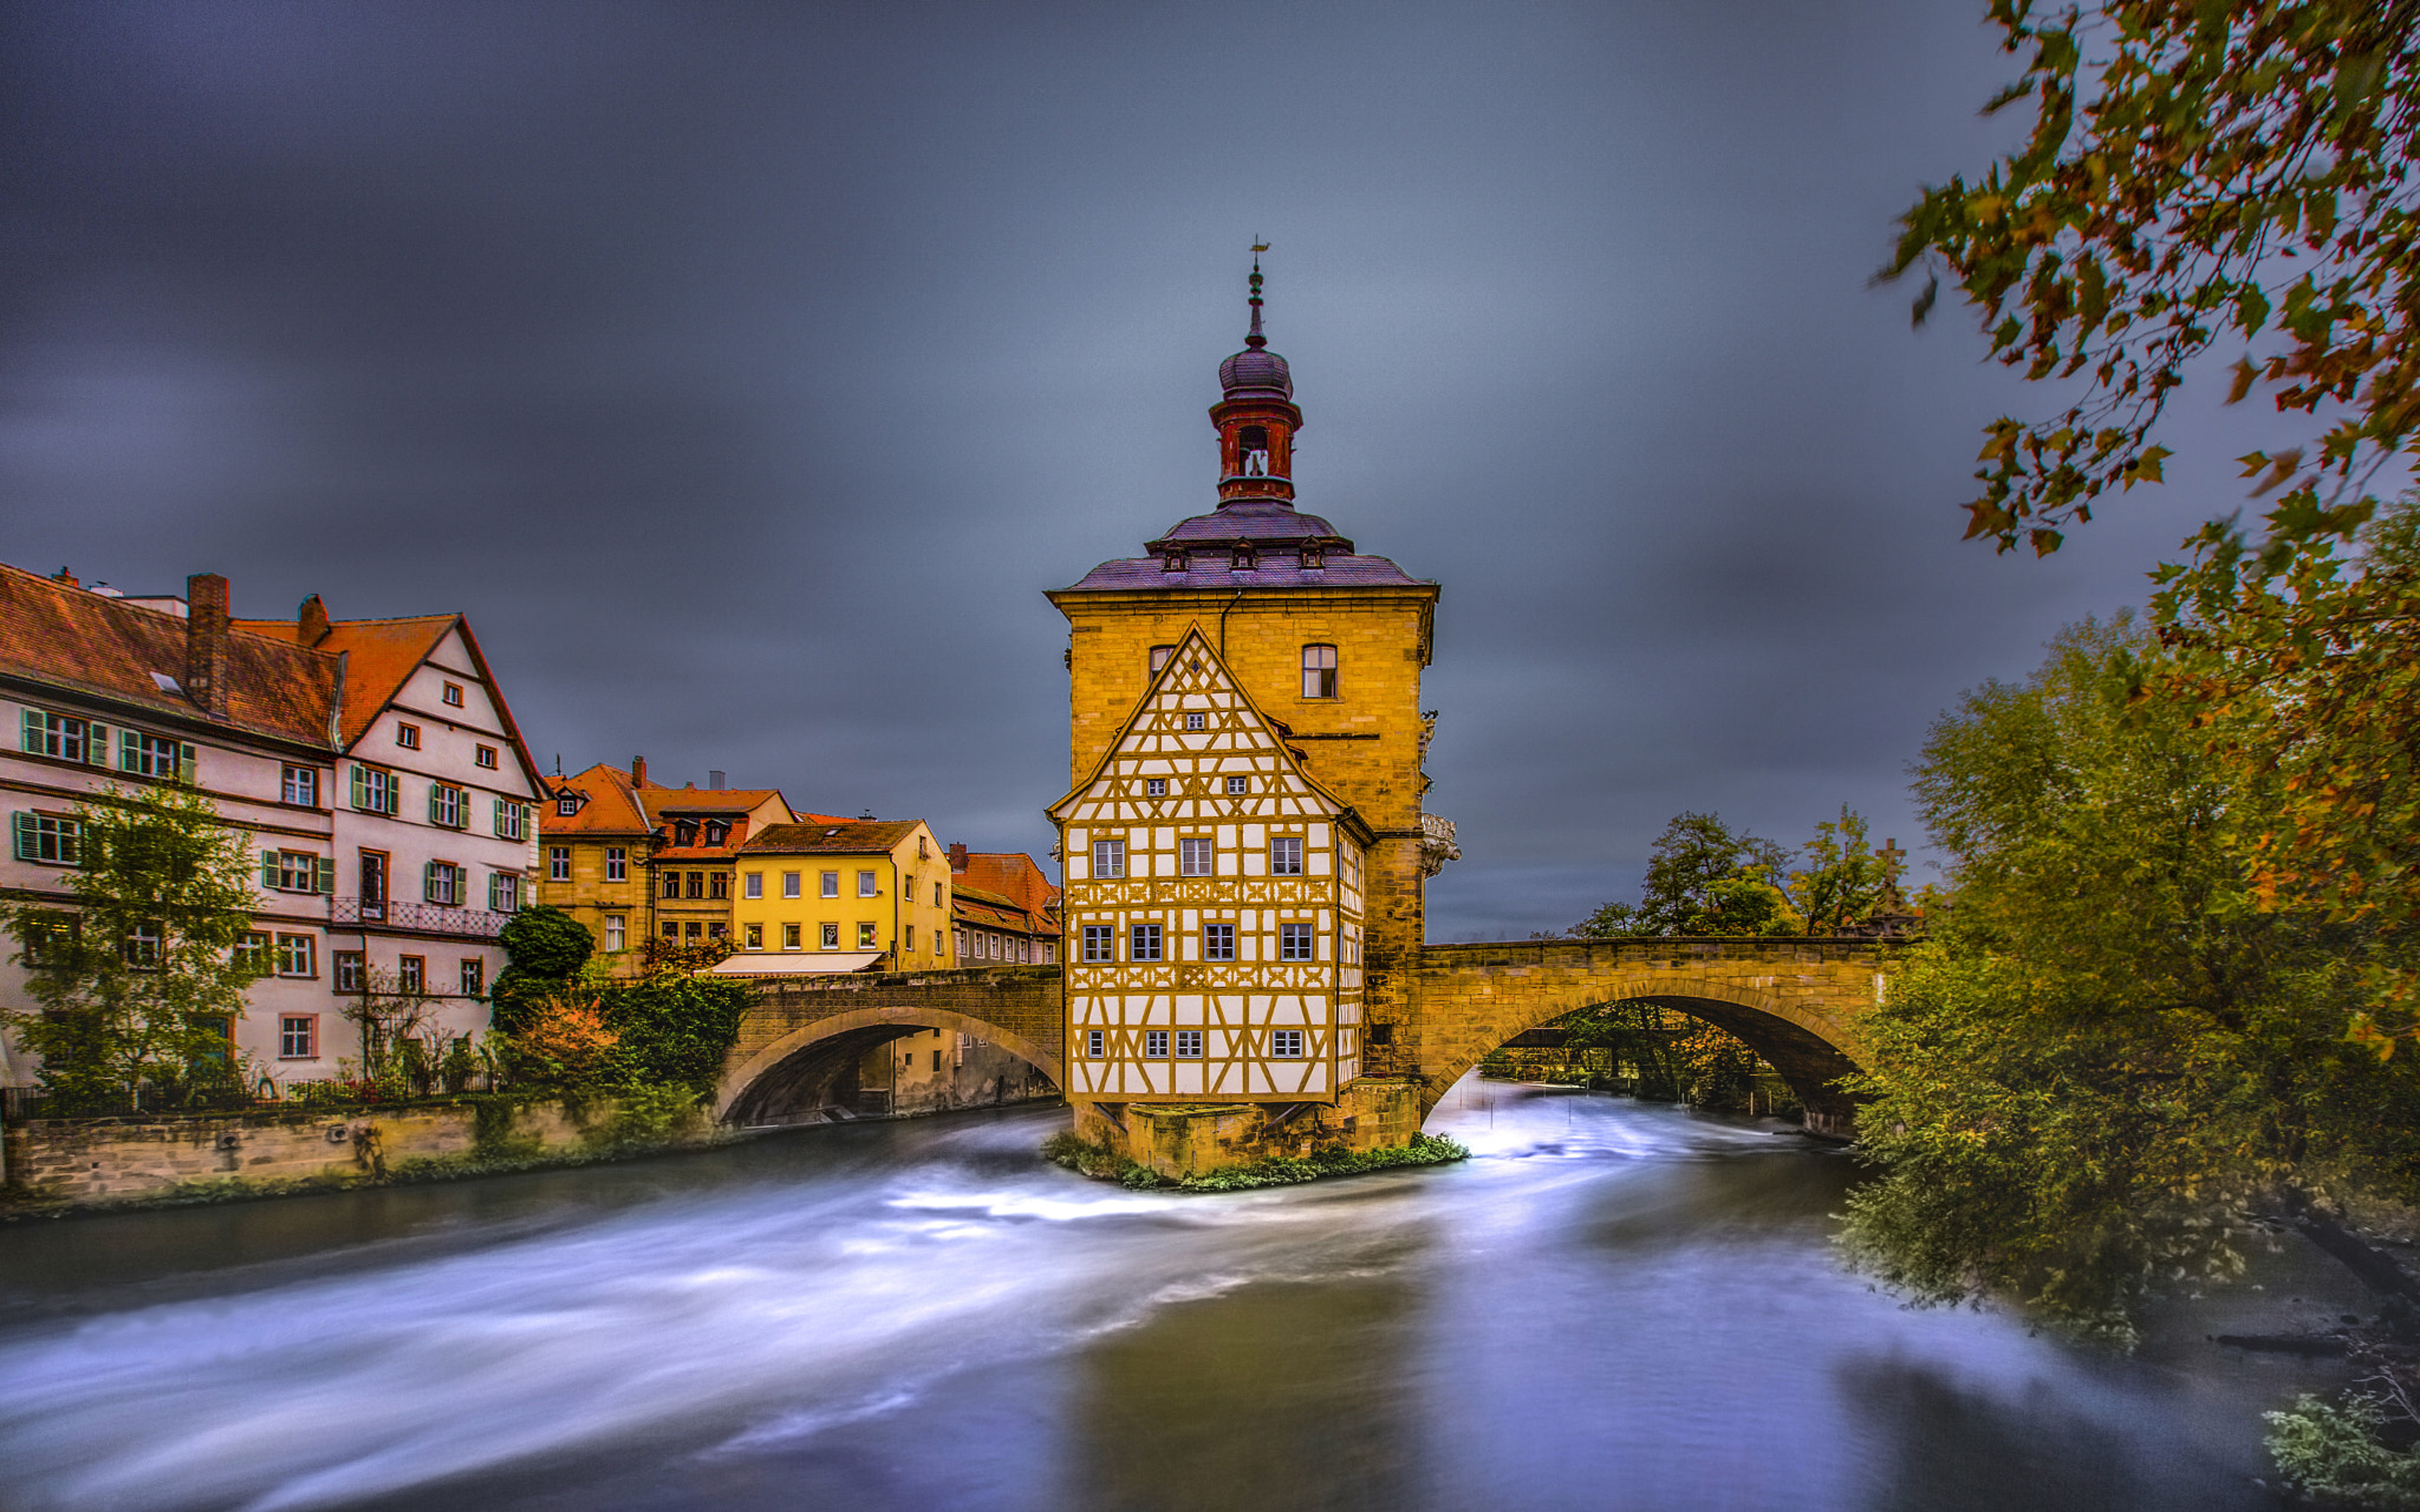 Bamberg Is A City In Northern Bavaria Germany Landscape Photography Desktop HD Wallpaper For Mobile Phones And Computer 3840x2400, Wallpaper13.com